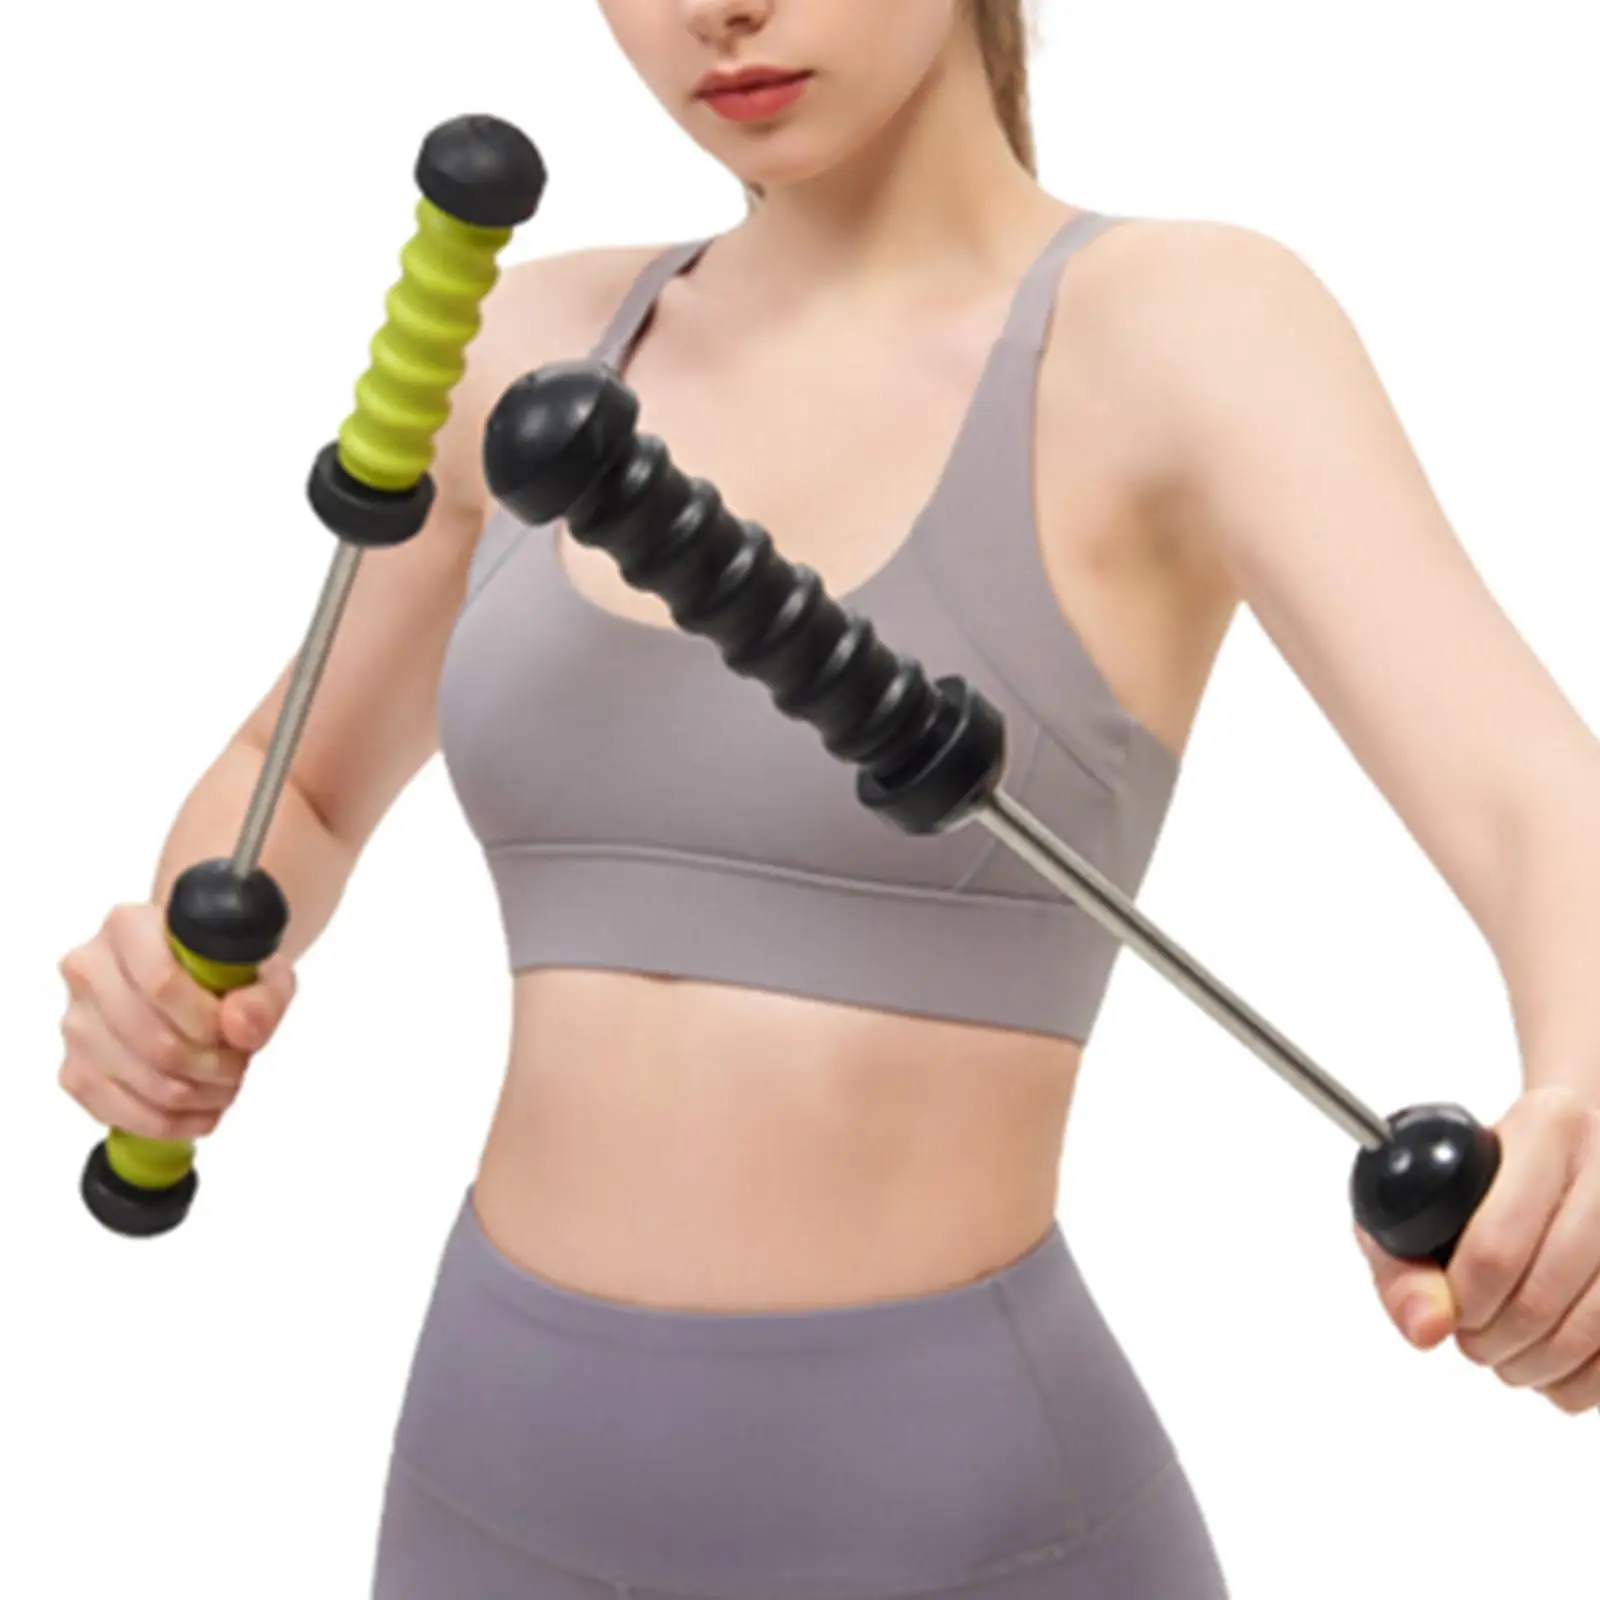 Arm Power Exerciser Chest Expander Muscle Training Bar Resistance Exercise Bands for Strengthener Home Women Men Workout